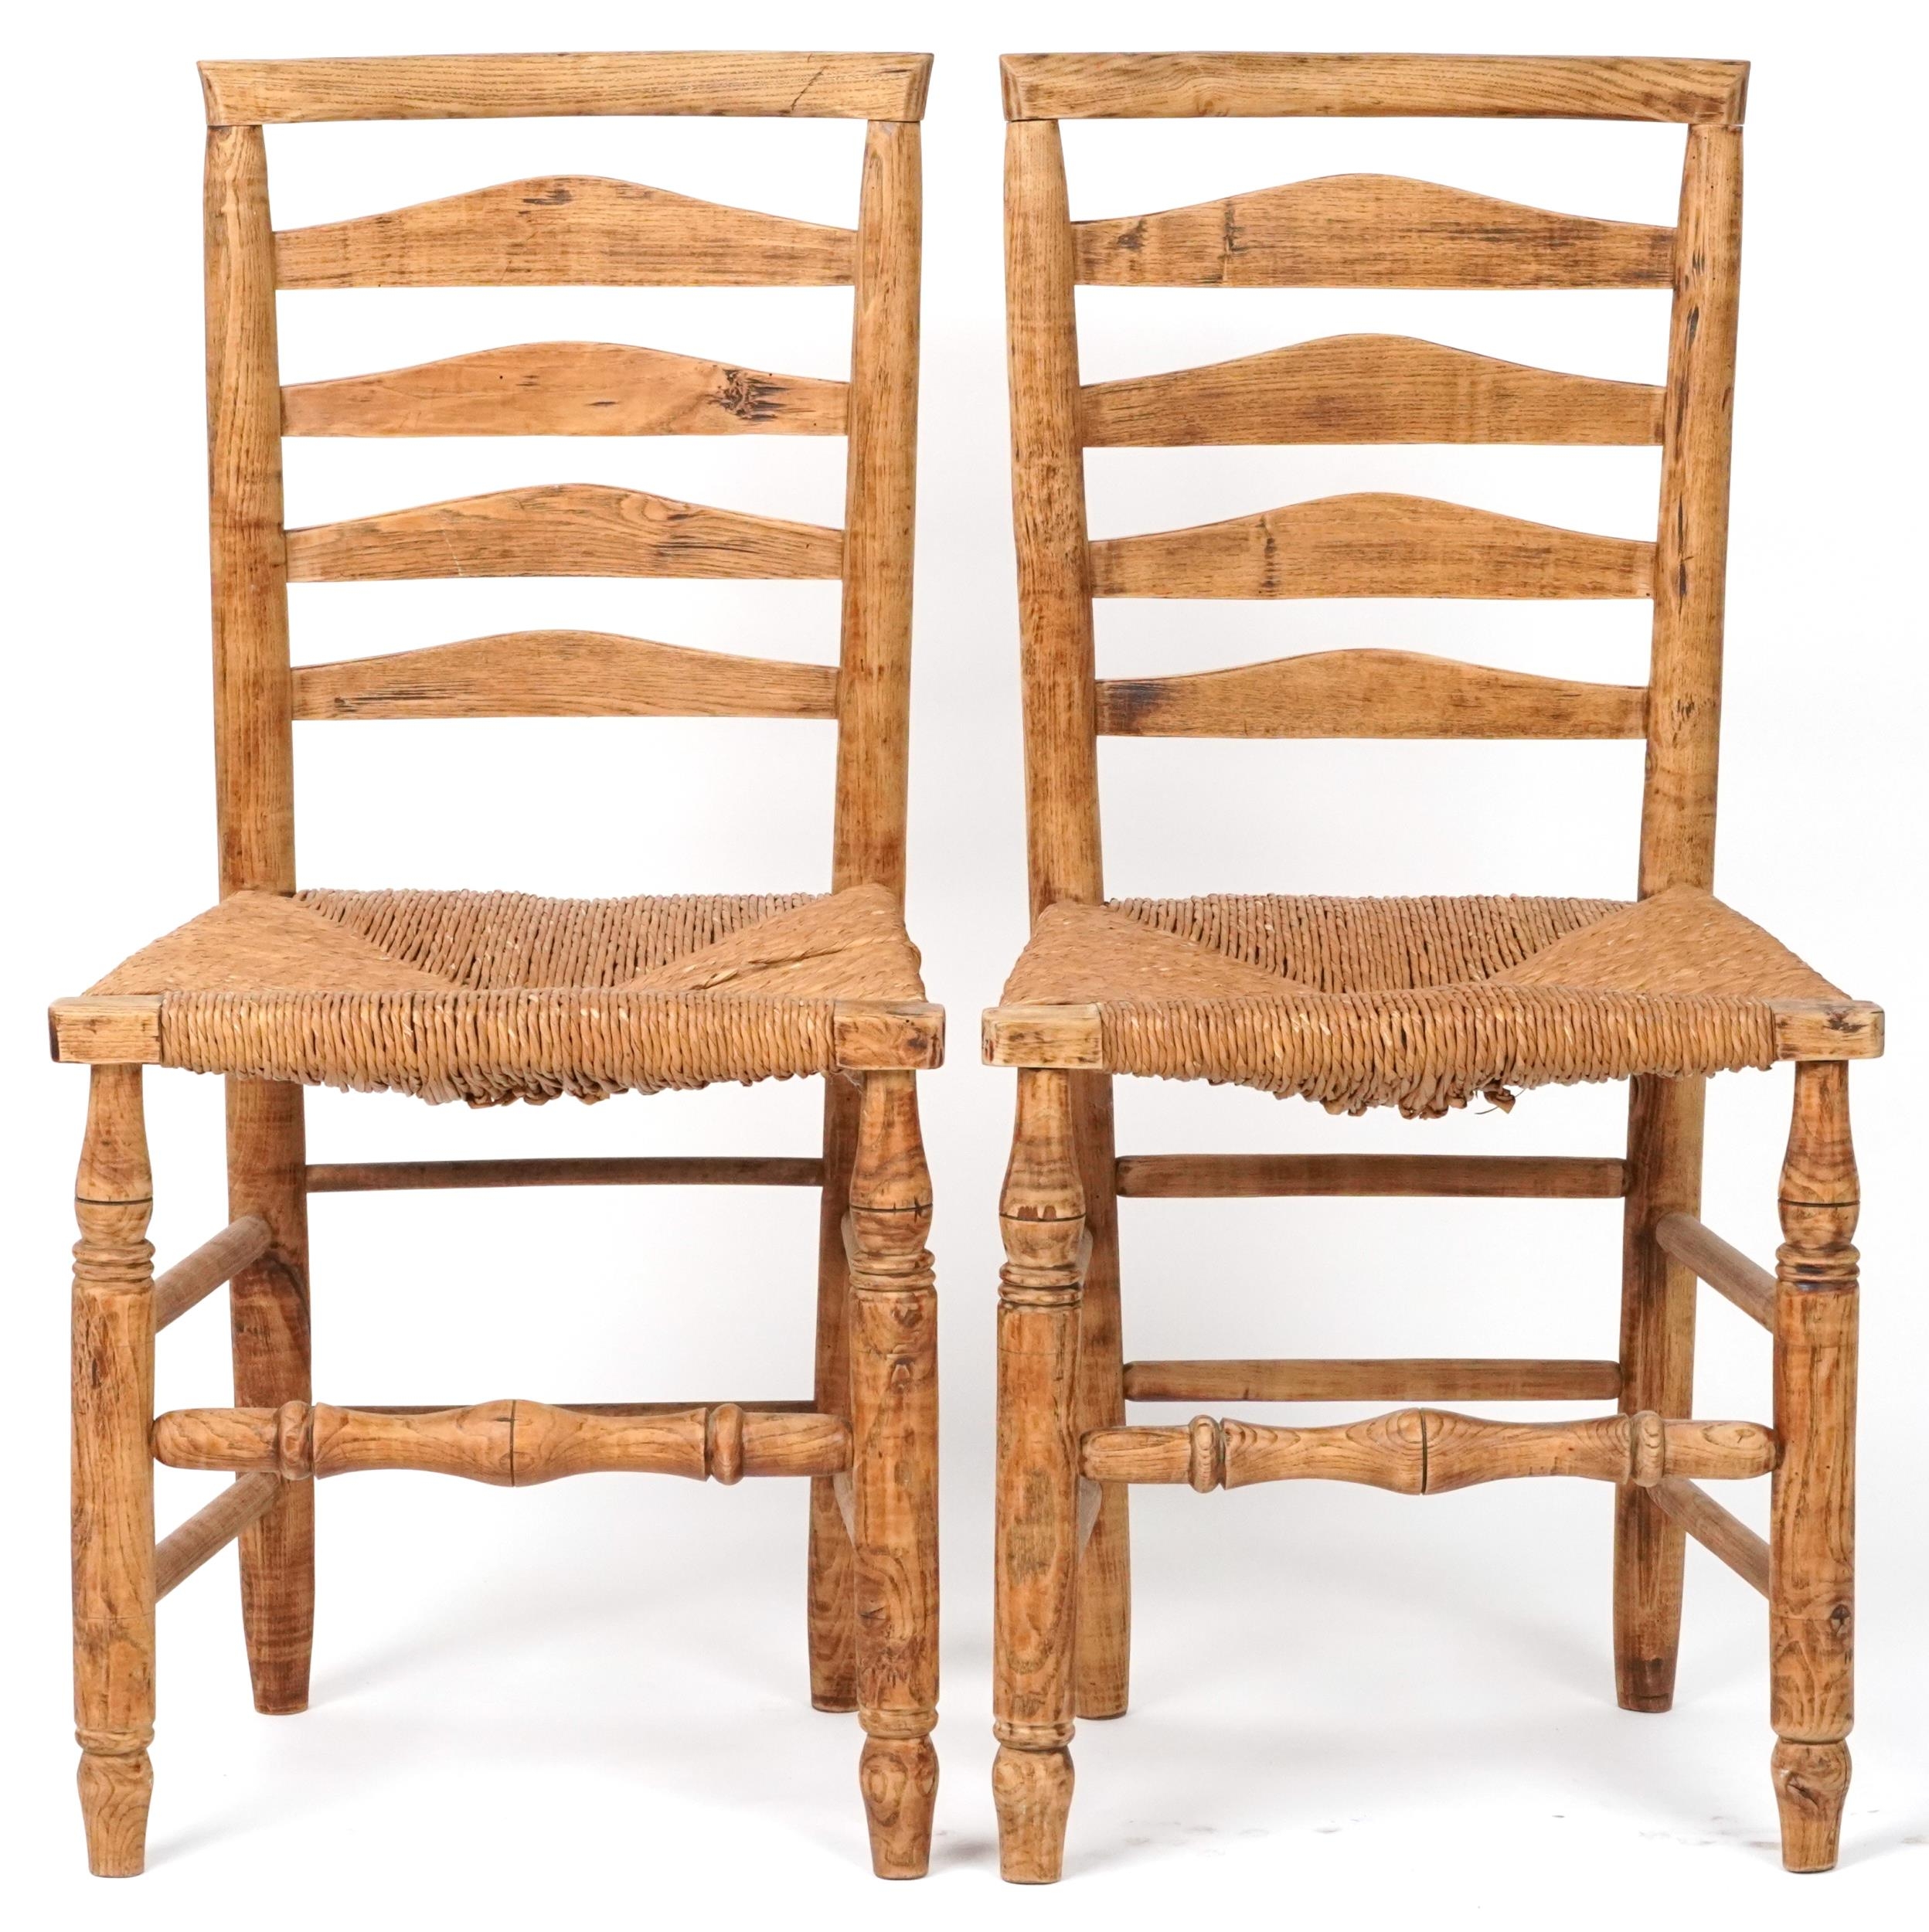 Pair of beech ladderback chairs with cane seats, each 93cm high - Image 2 of 4